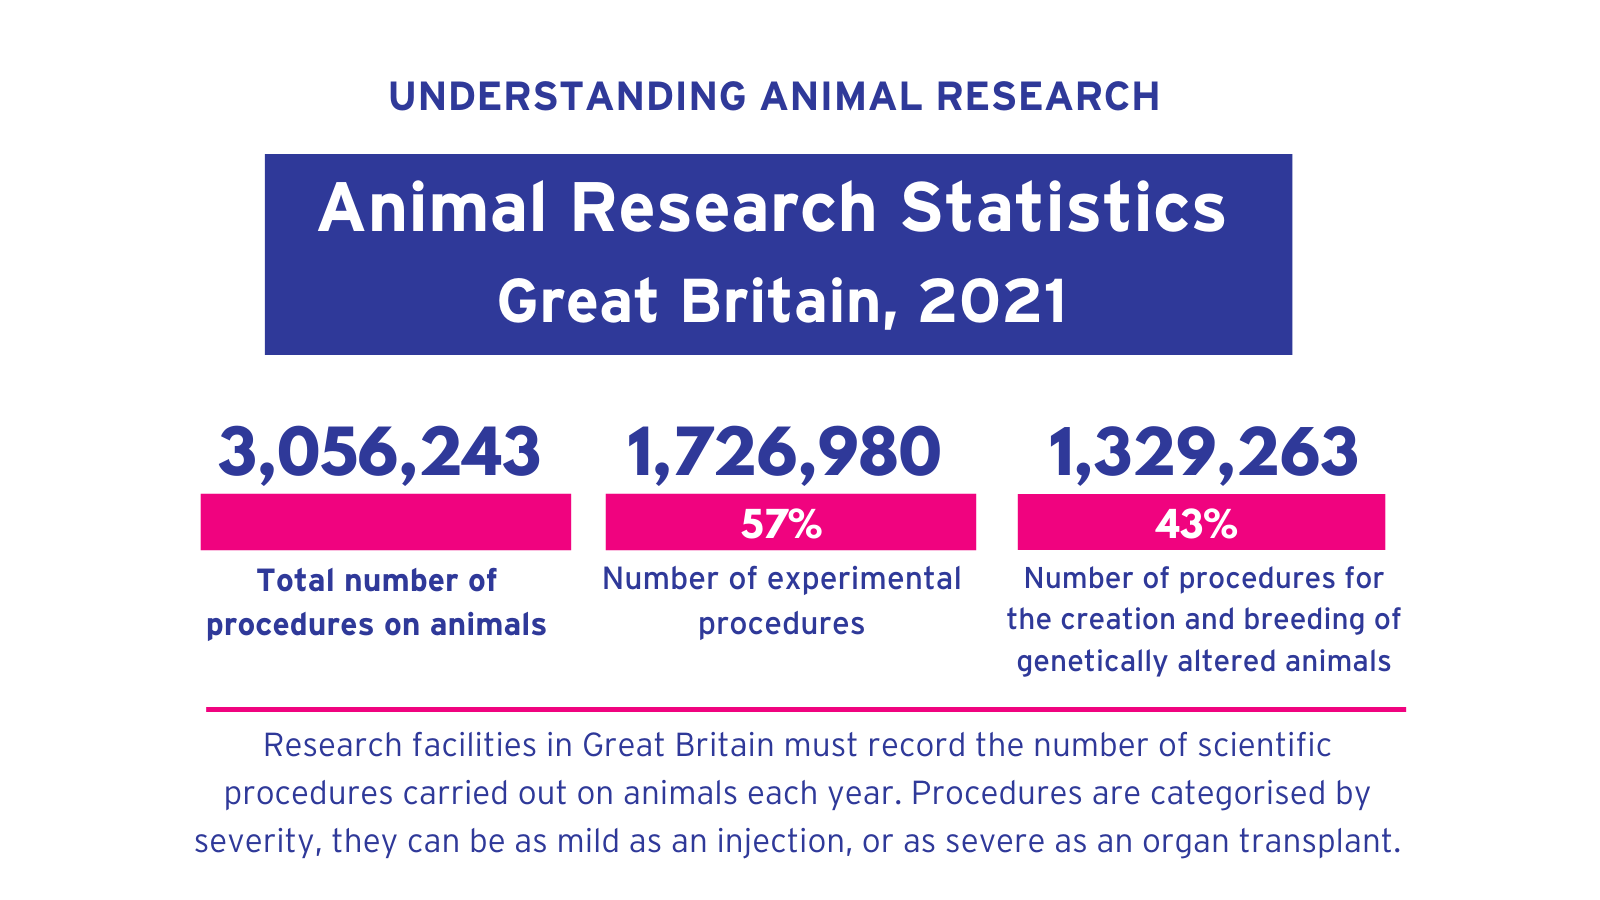 Animal research statistics for Great Britain, 2021